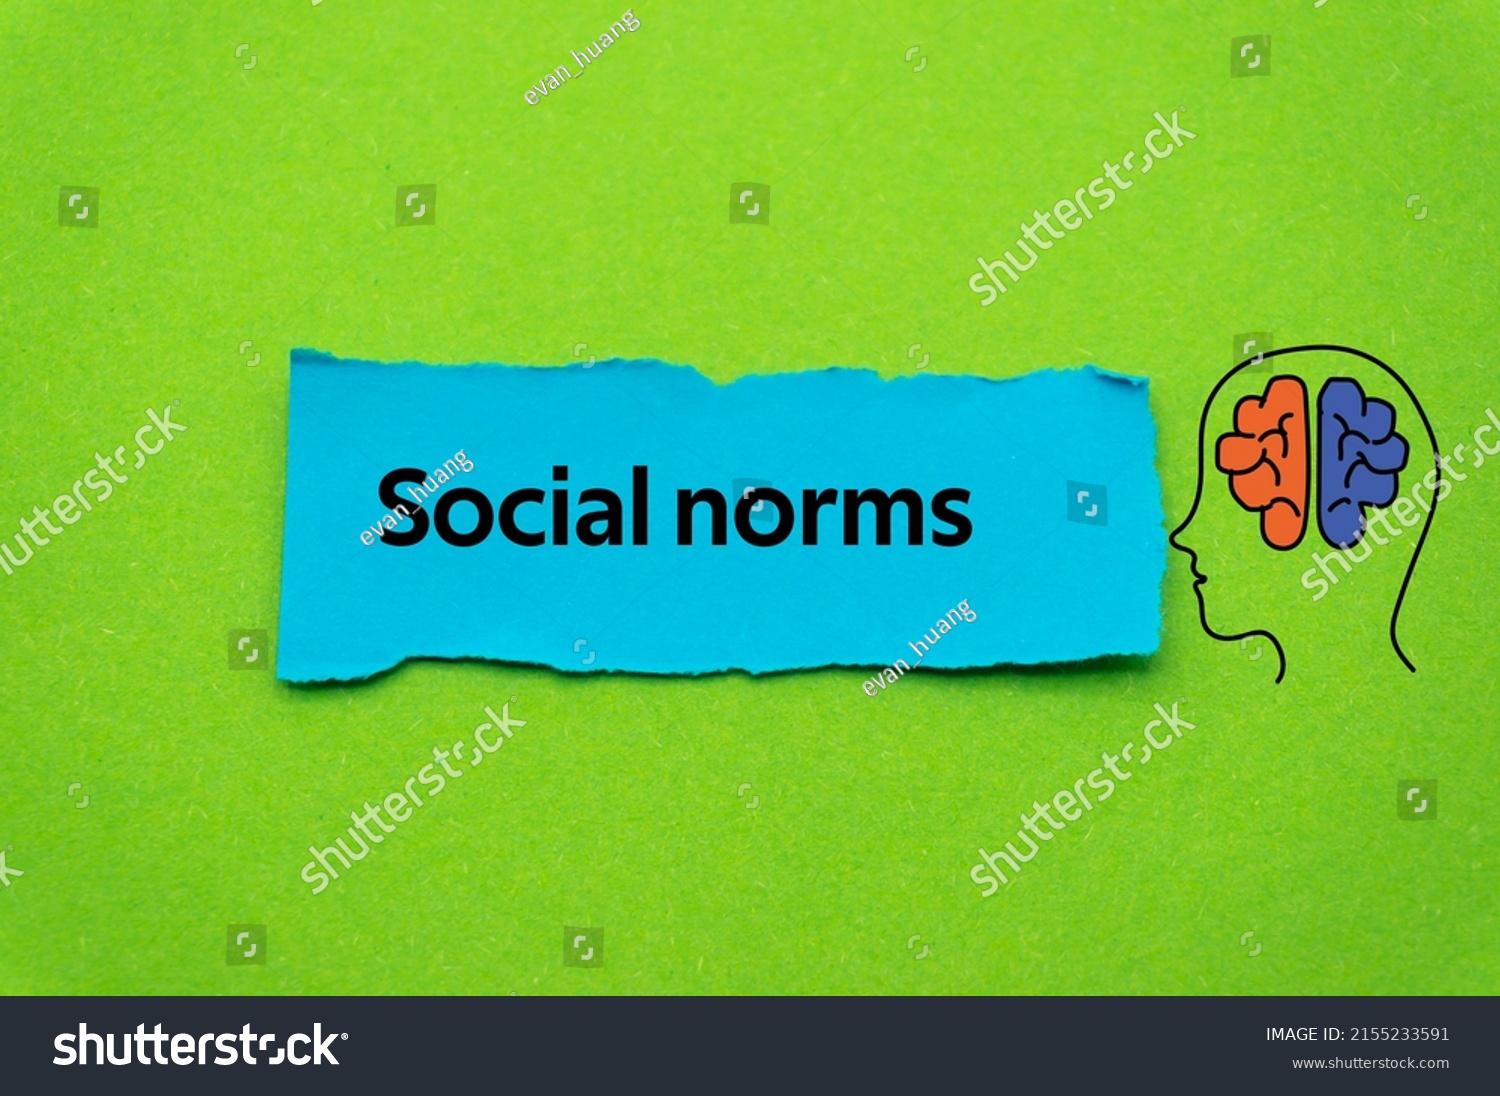 Social norms.The word is written on a slip of colored paper. Psychological terms, psychologic words, Spiritual terminology. psychiatric research. Mental Health Buzzwords. #2155233591